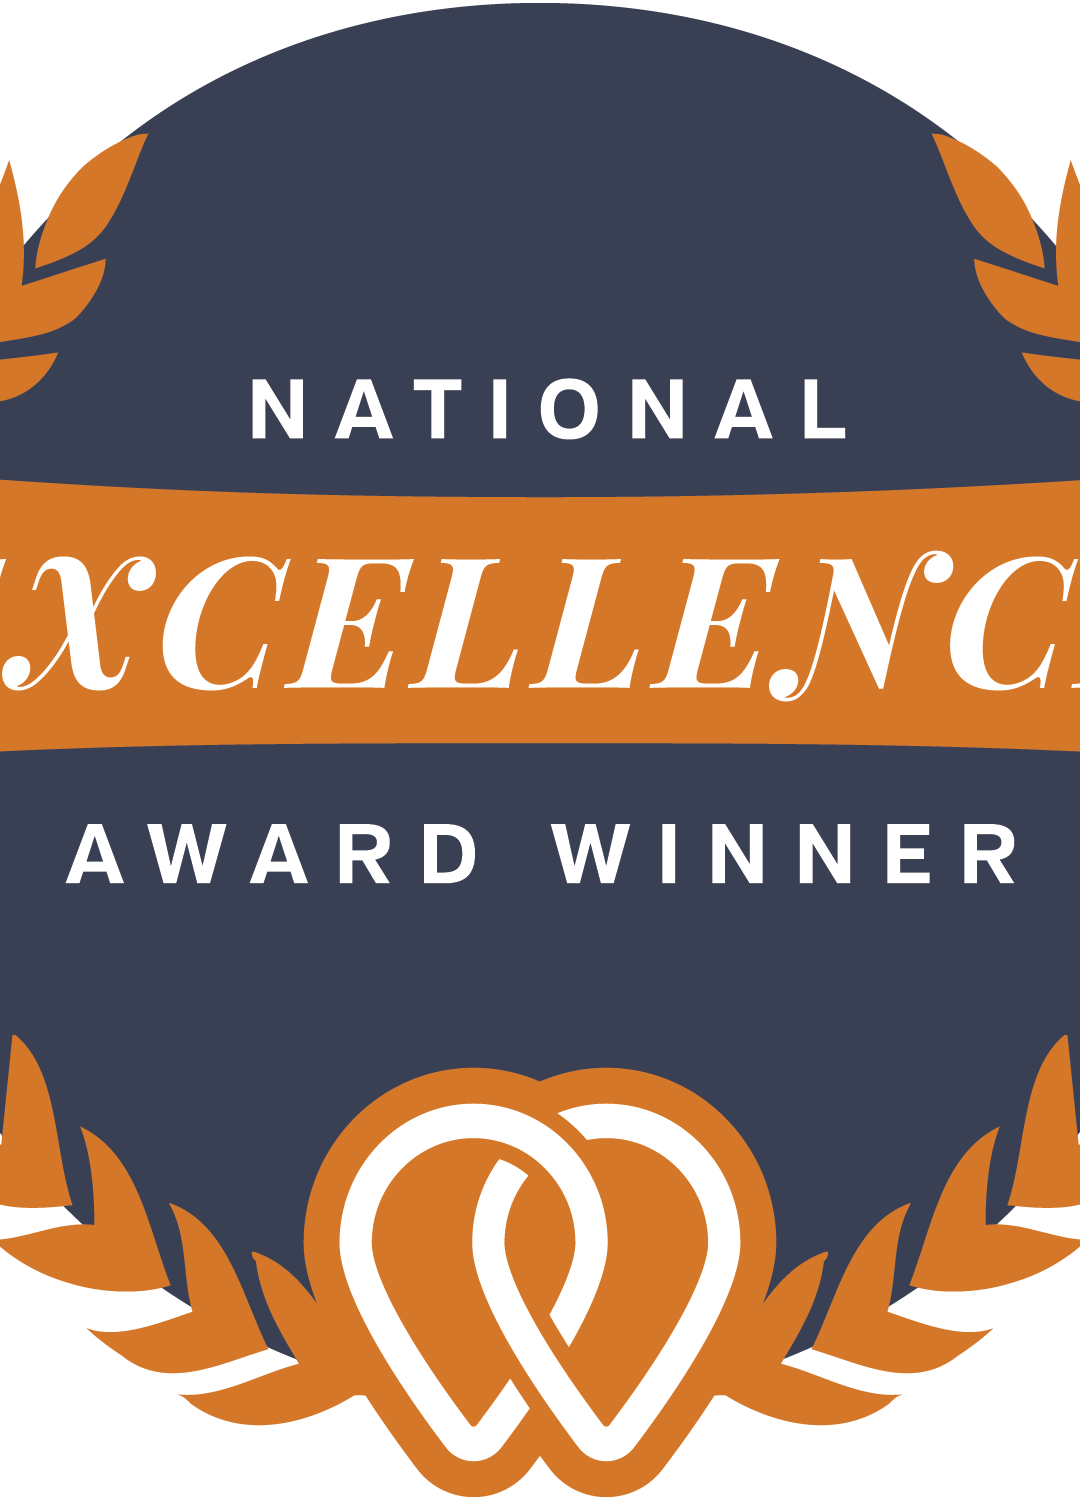 Ask the Egghead Inc. Announced as a 2021 National and Local Excellence Award Winner by UpCity!